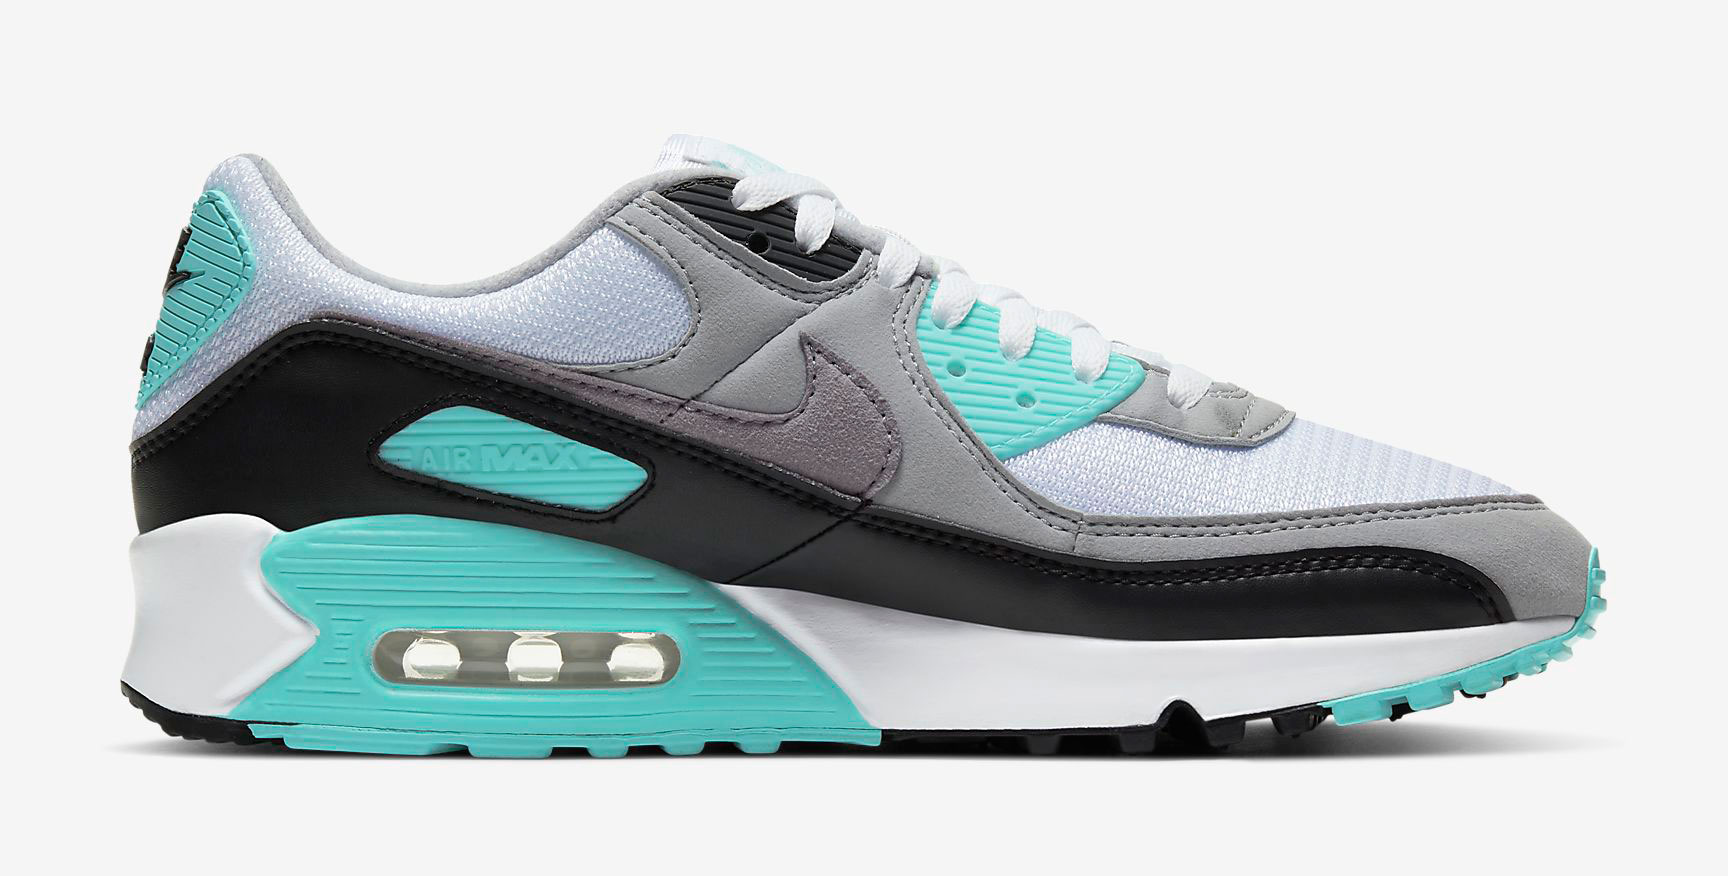 nike-air-max-90-hyper-turquoise-release-date-price-3